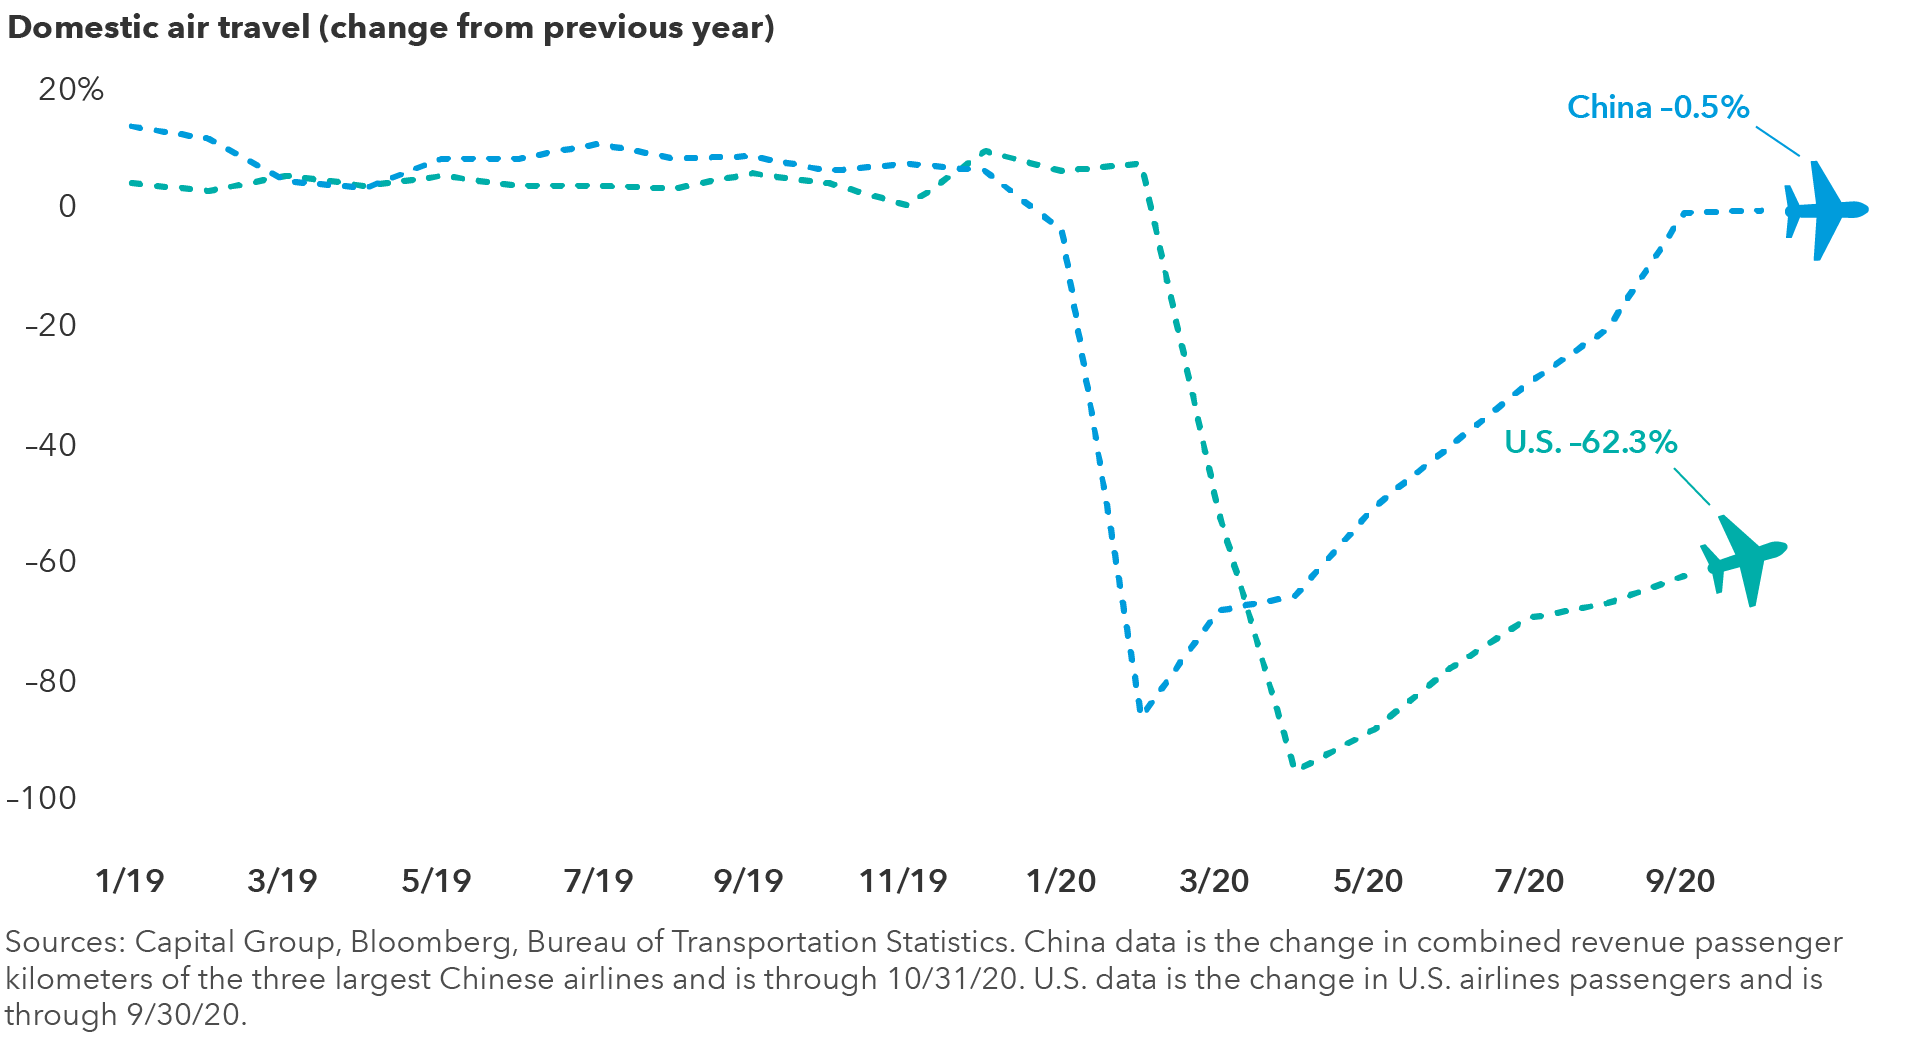 The chart compares the percent change in domestic air travel from the prior year in both China and the U.S. from January 2019 through October 2020. Following relatively modest growth in 2019, domestic air travel in China plummeted more than 86% in February 2020, then rebounded to down just 0.5% from the prior year in October 2020. In the U.S., after a period of relatively stable growth, air travel declined more than 95% in April 2020, then improved to down 62.3% in September 2020. Sources: Capital Group, Bloomberg, Bureau of Transportation Statistics. China data is the change in combined revenue passenger kilometers of the three largest Chinese airlines and is through October 31, 2020. U.S. data is the change in U.S. airline passengers and is through September 30, 2020.